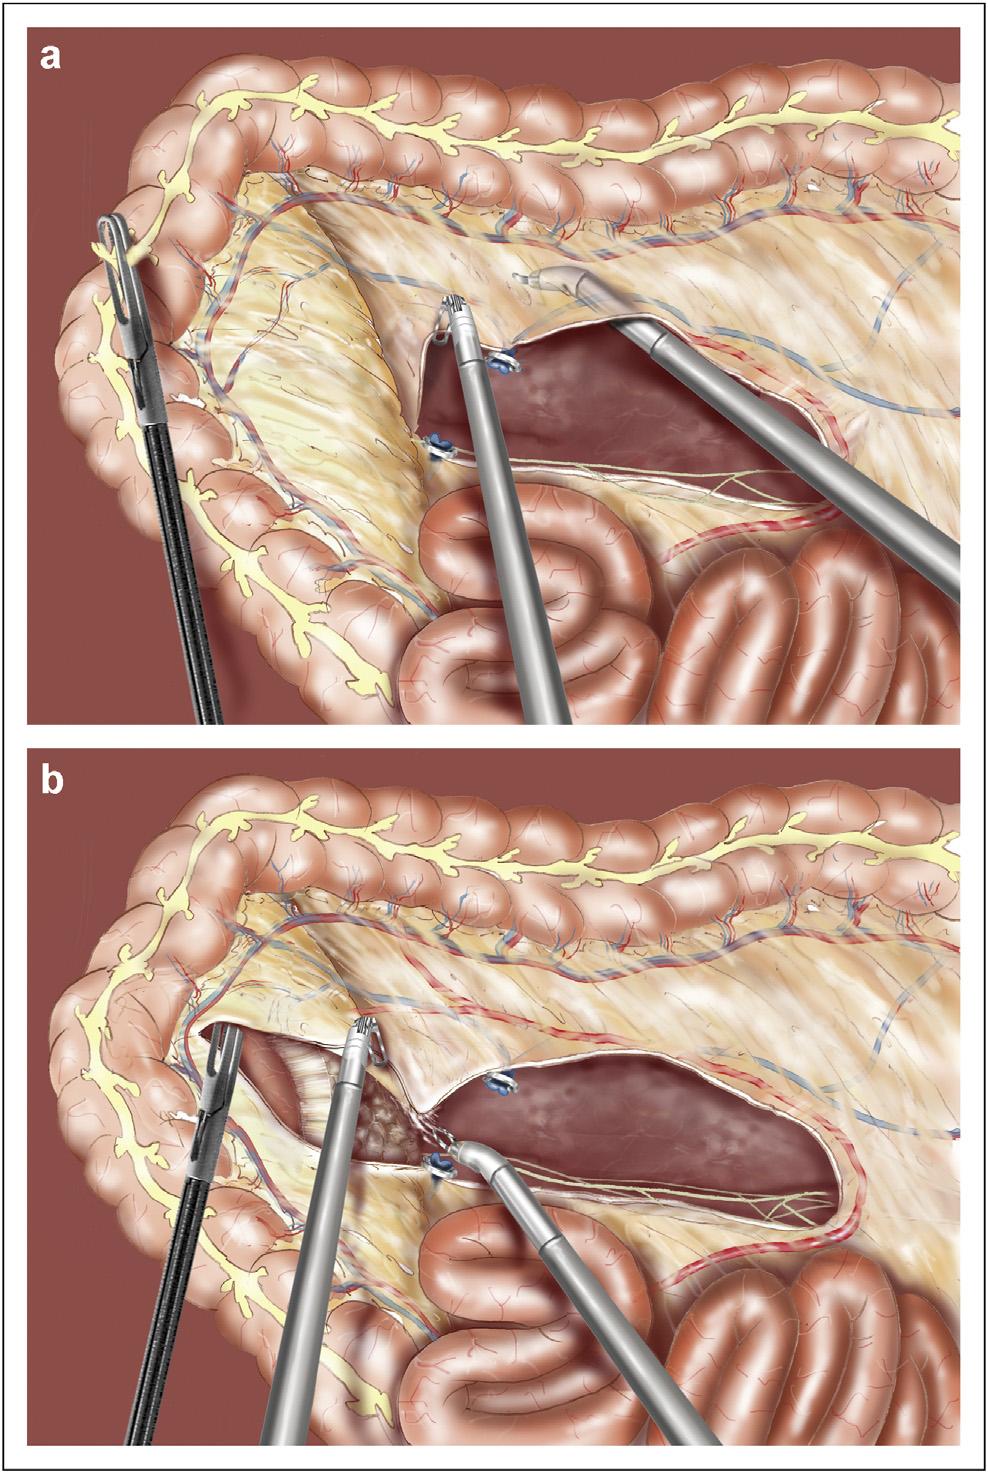 The sequence of operative steps can be performed by progressively approaching each area of dissection in a circular manner, from cephalad caudad and from medial to lateral, leaving the lateral